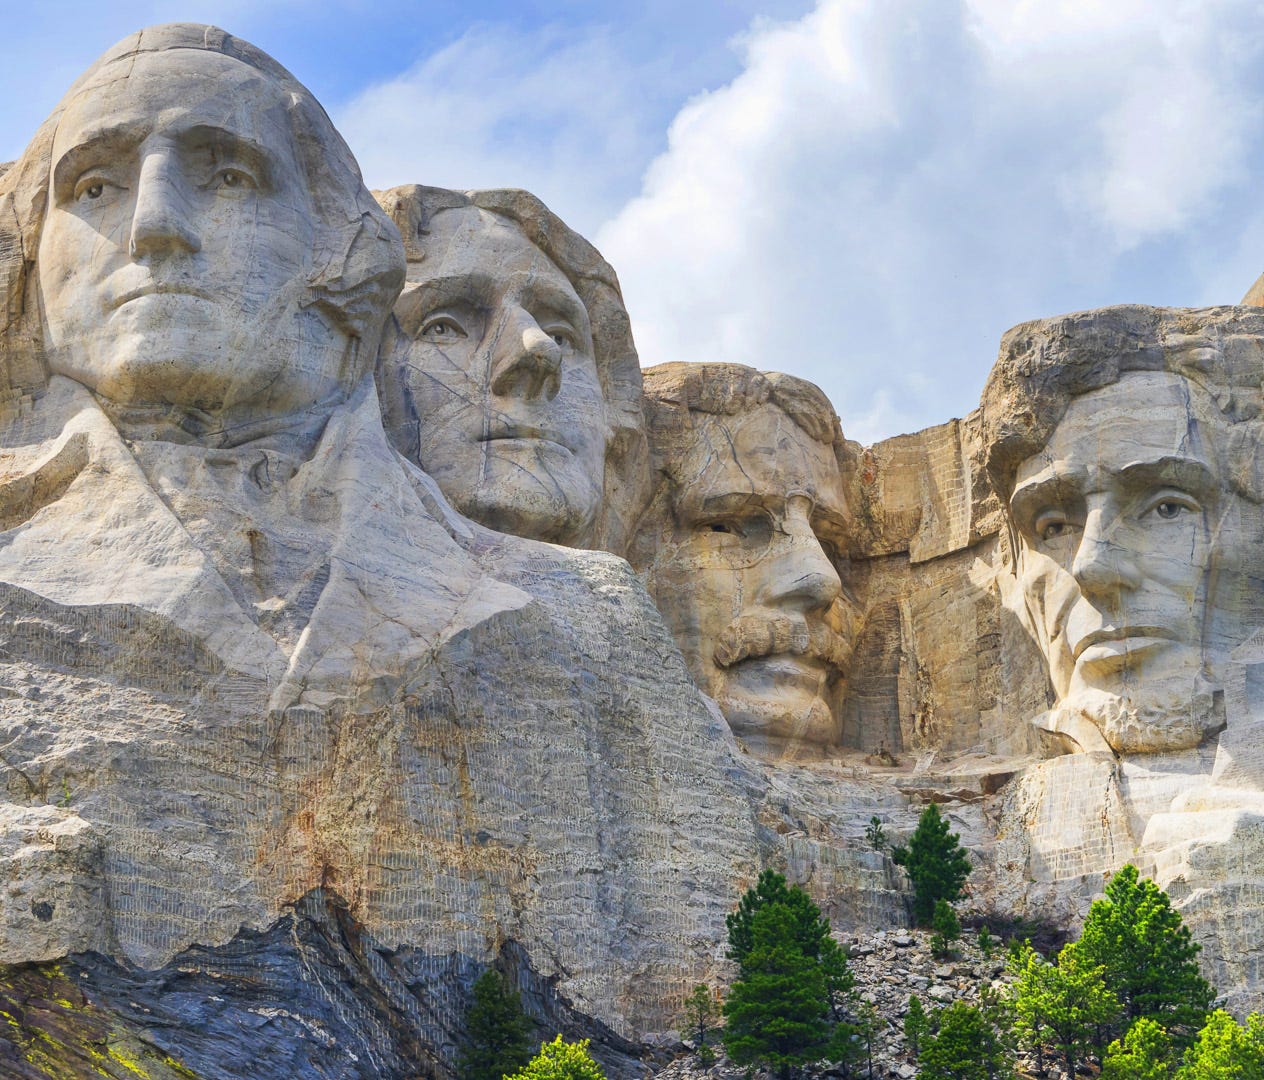 South Dakota: Mount Rushmore is one of the most quintessential tourist attractions in the country — and it's free. You know that you'll be seeing the huge, carved faces of past presidents Washington, Jefferson, Roosevelt and Lincoln, but throughout t